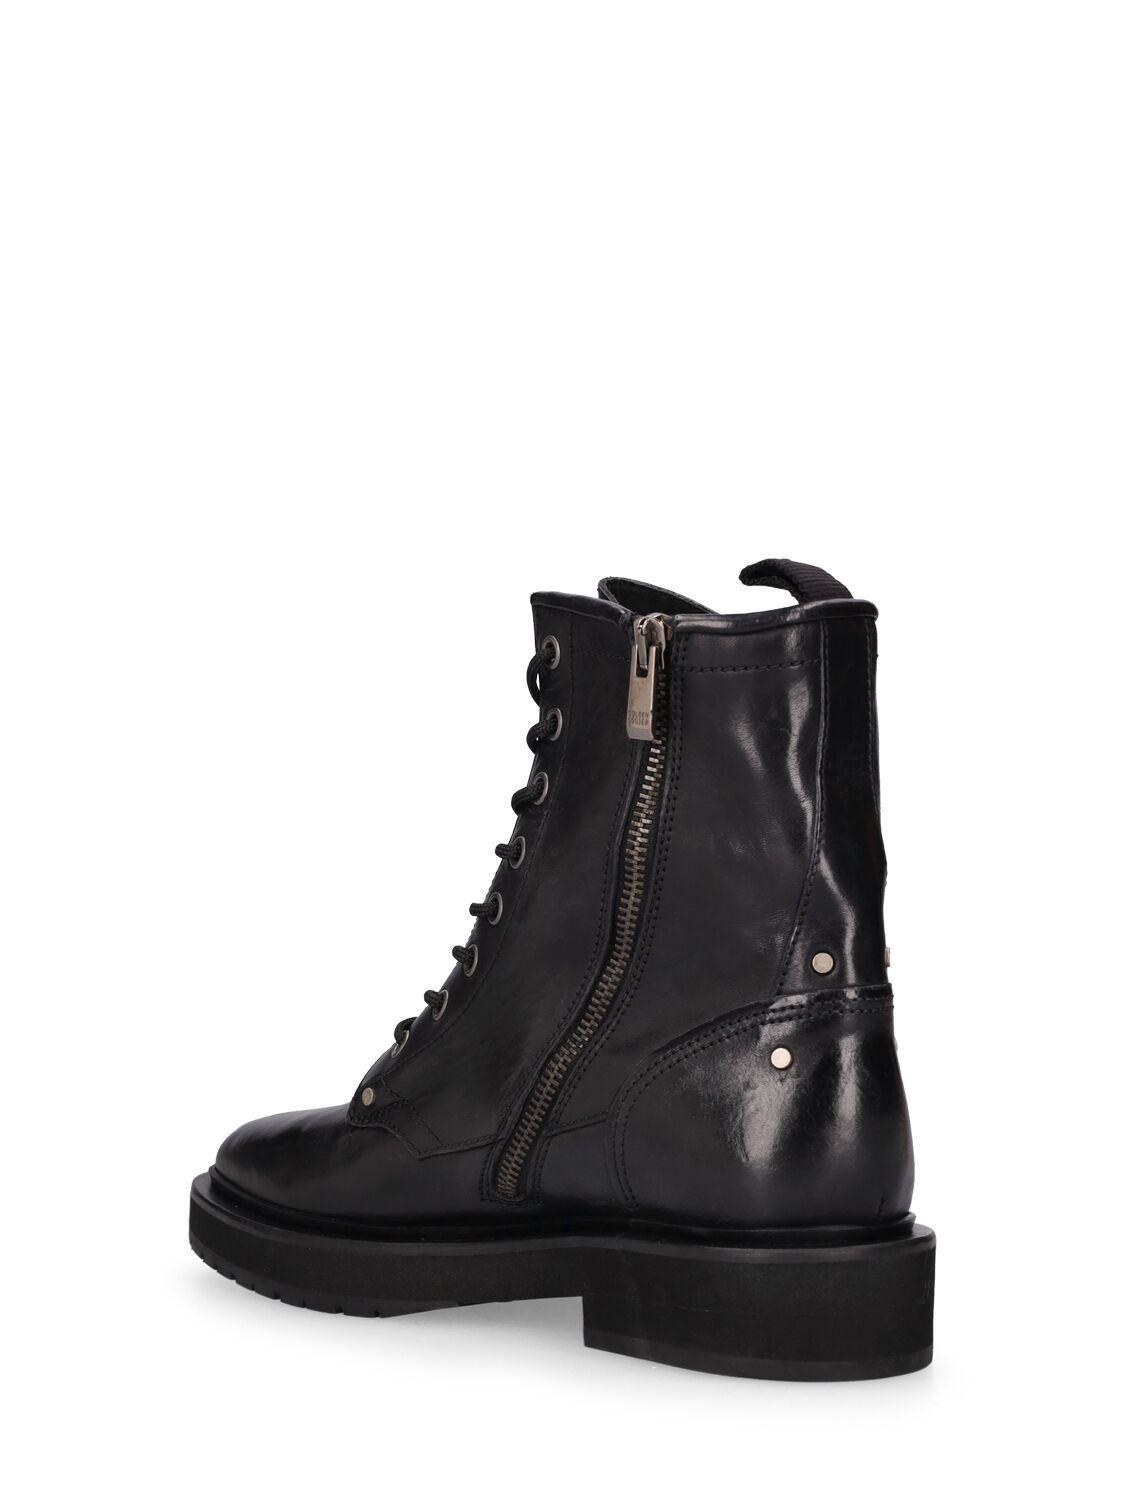 Golden Goose Combat Leather Boots in Black | Lyst